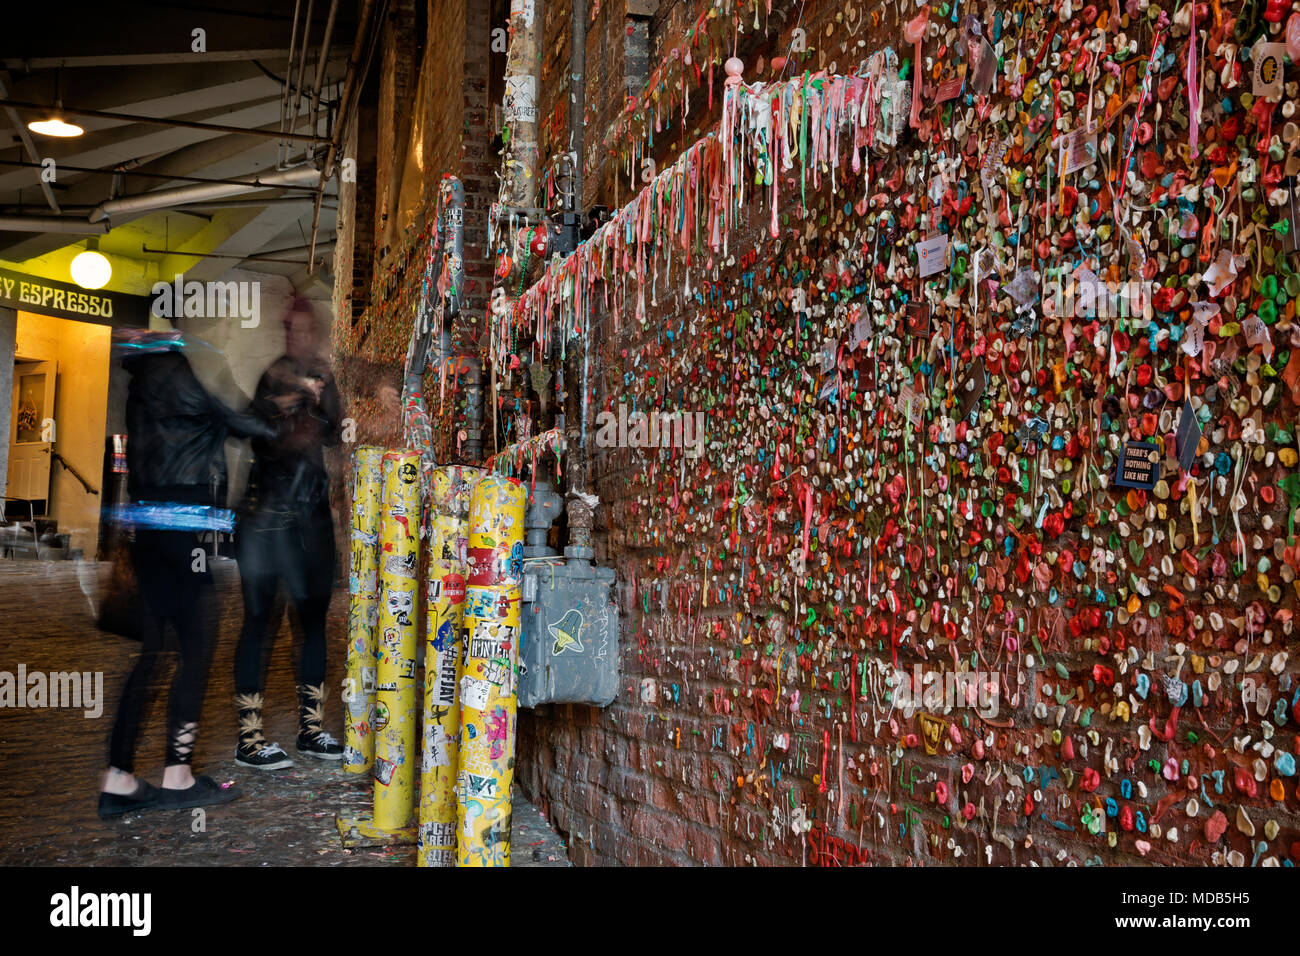 WA15282-00...WASHINGTON - Visitors placing gum on the recently cleaned gum wall in Seattle's Post Alley, located just south of the Pike Place Market. Stock Photo